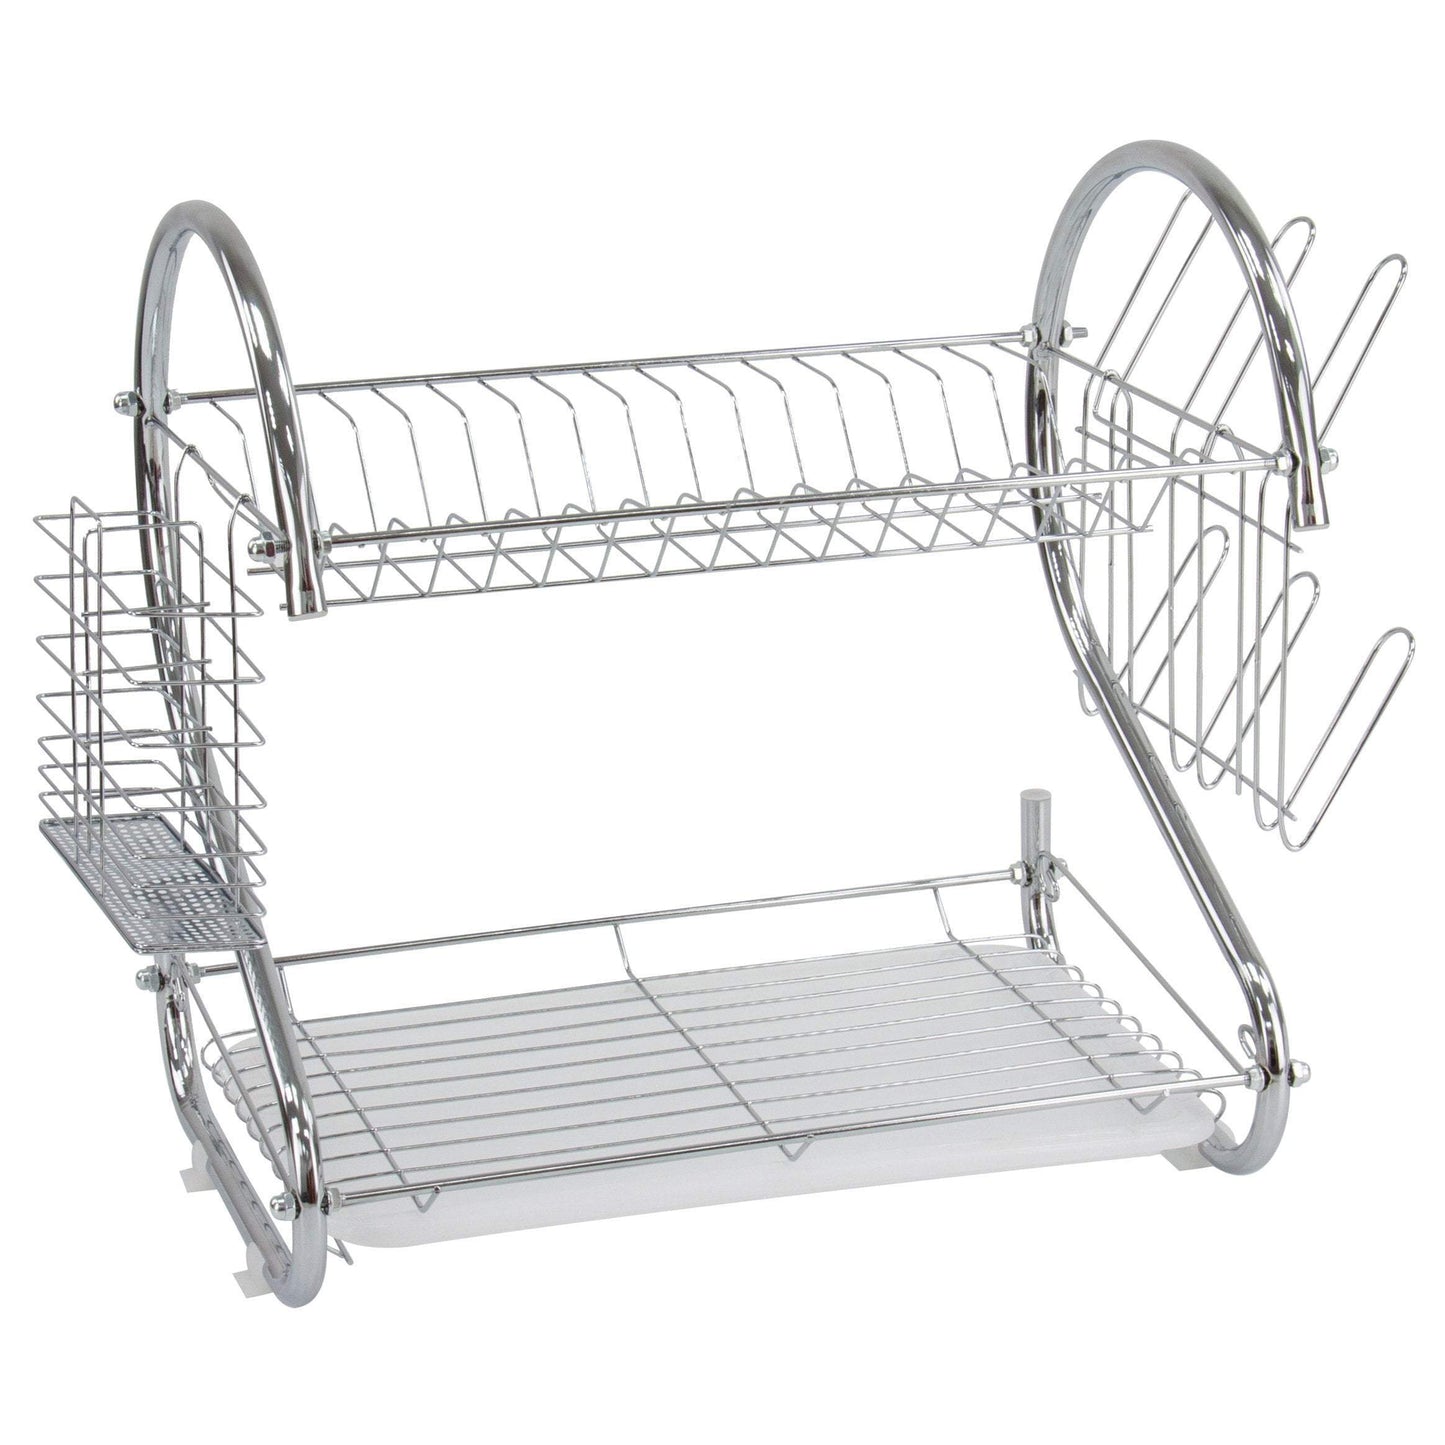 2 Tier Dish Drainer Rack With Cutlery Rack Holds Plates Mugs Cups Anti Slip Chrome Finish 9168 (Parcel Rate)